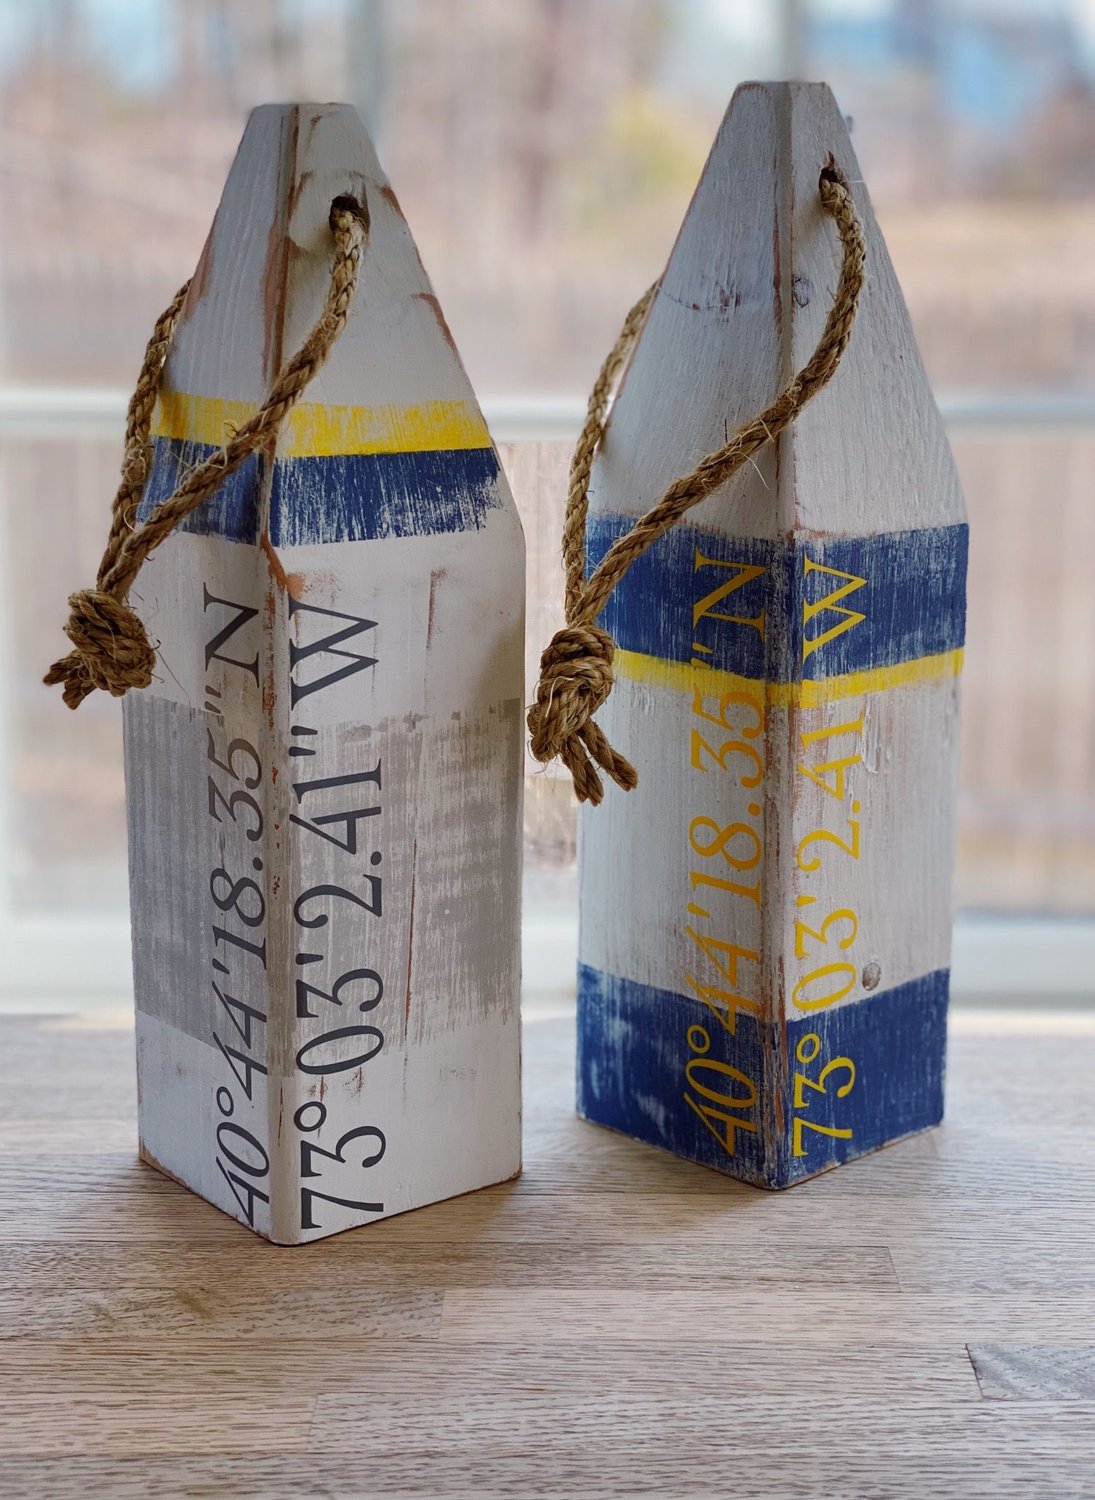 For the Instagram influencer: Personalized wooden buoys with your home’s coordinates locally sourced and based in Bayport. Available custom order from Middle Oak Arts on Instagram: MiddleOakArts.